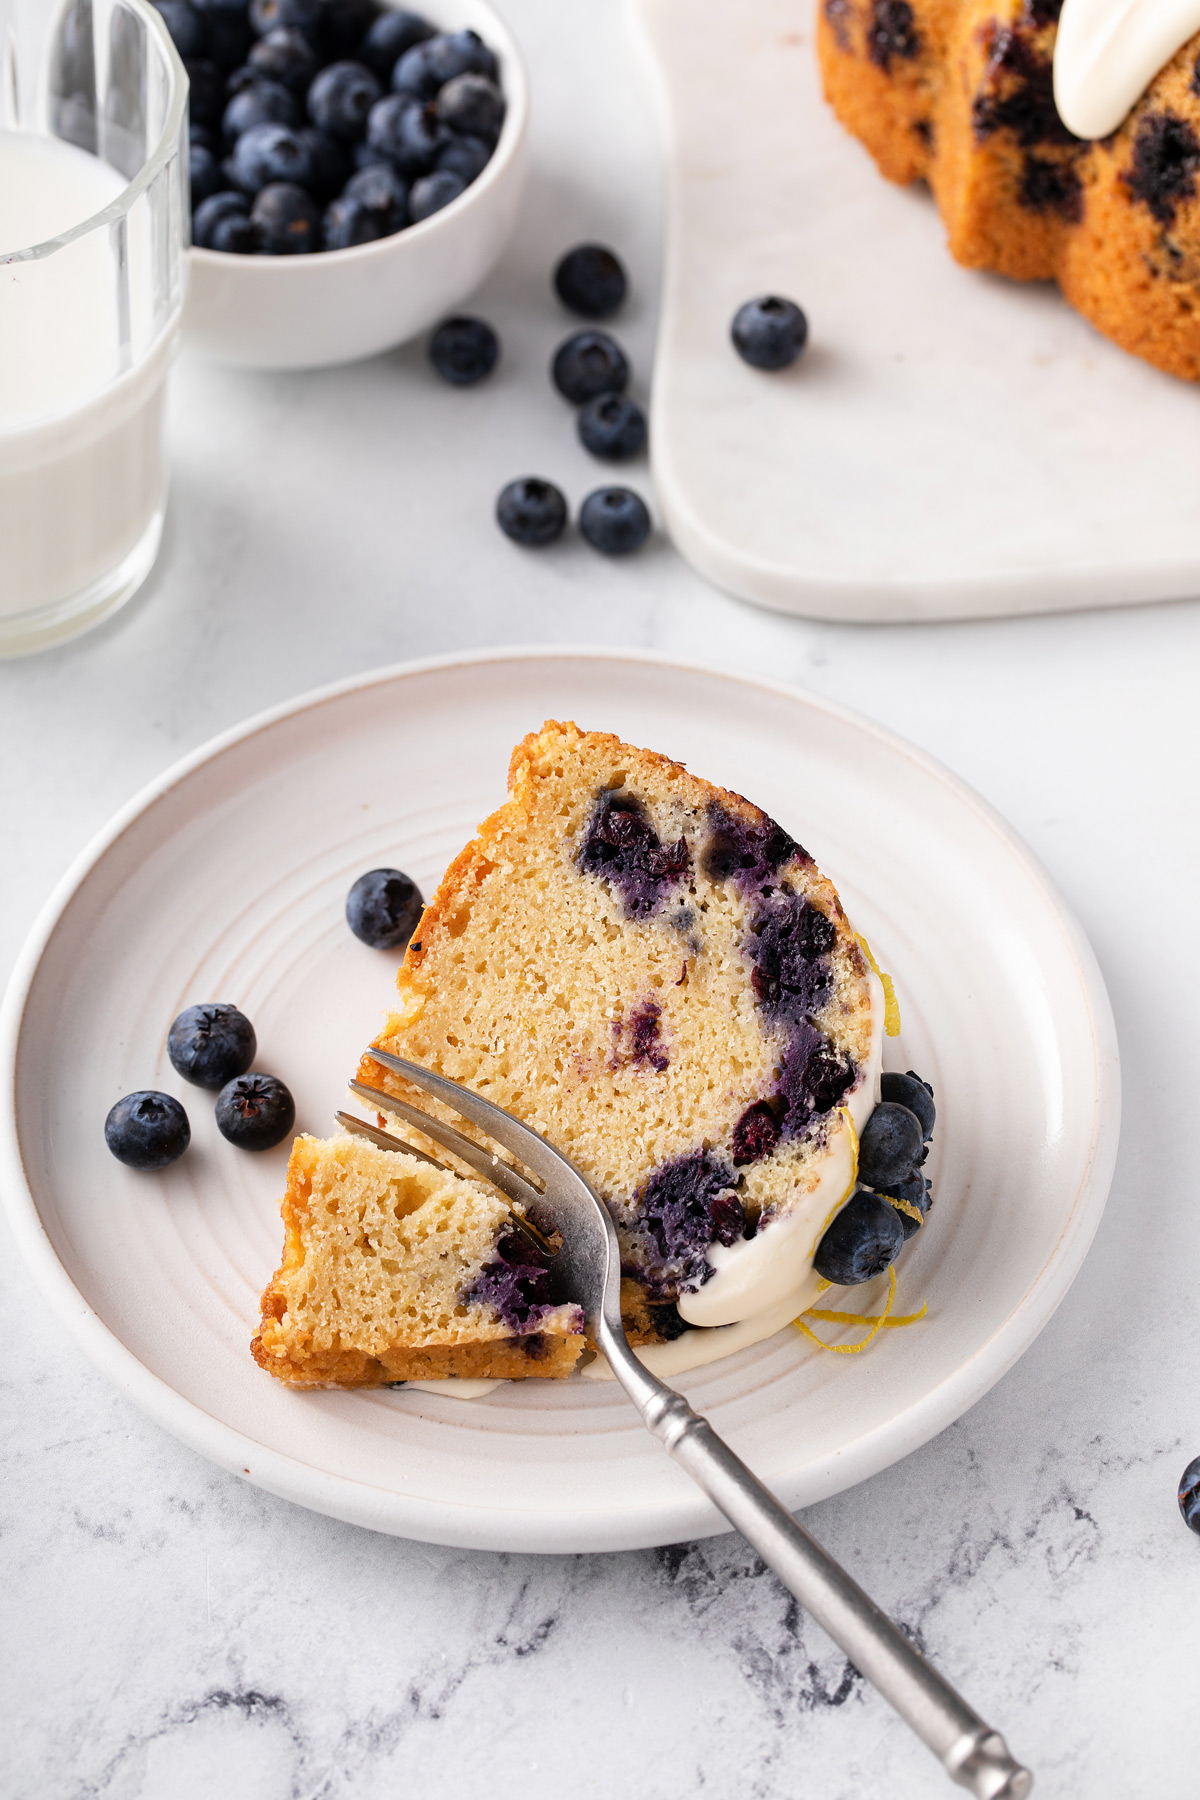 Slice of lemon-blueberry bundt cake being cut into with a fork on a white plate.